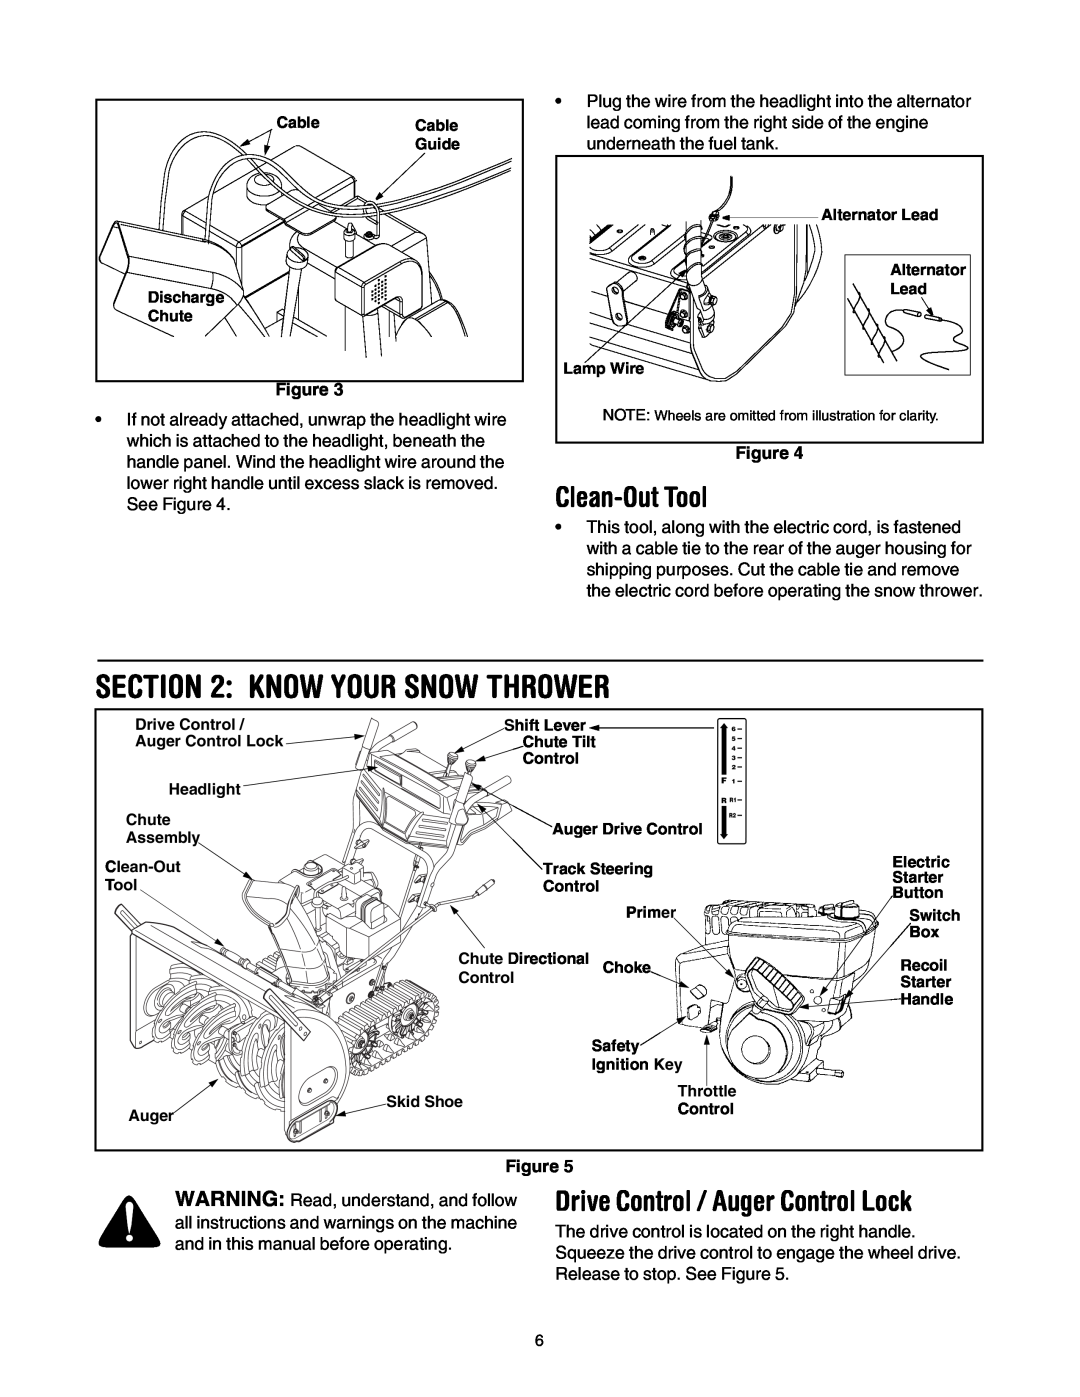 Cub Cadet 730 STE manual Know Your Snow Thrower, Clean-OutTool, Drive Control / Auger Control Lock 